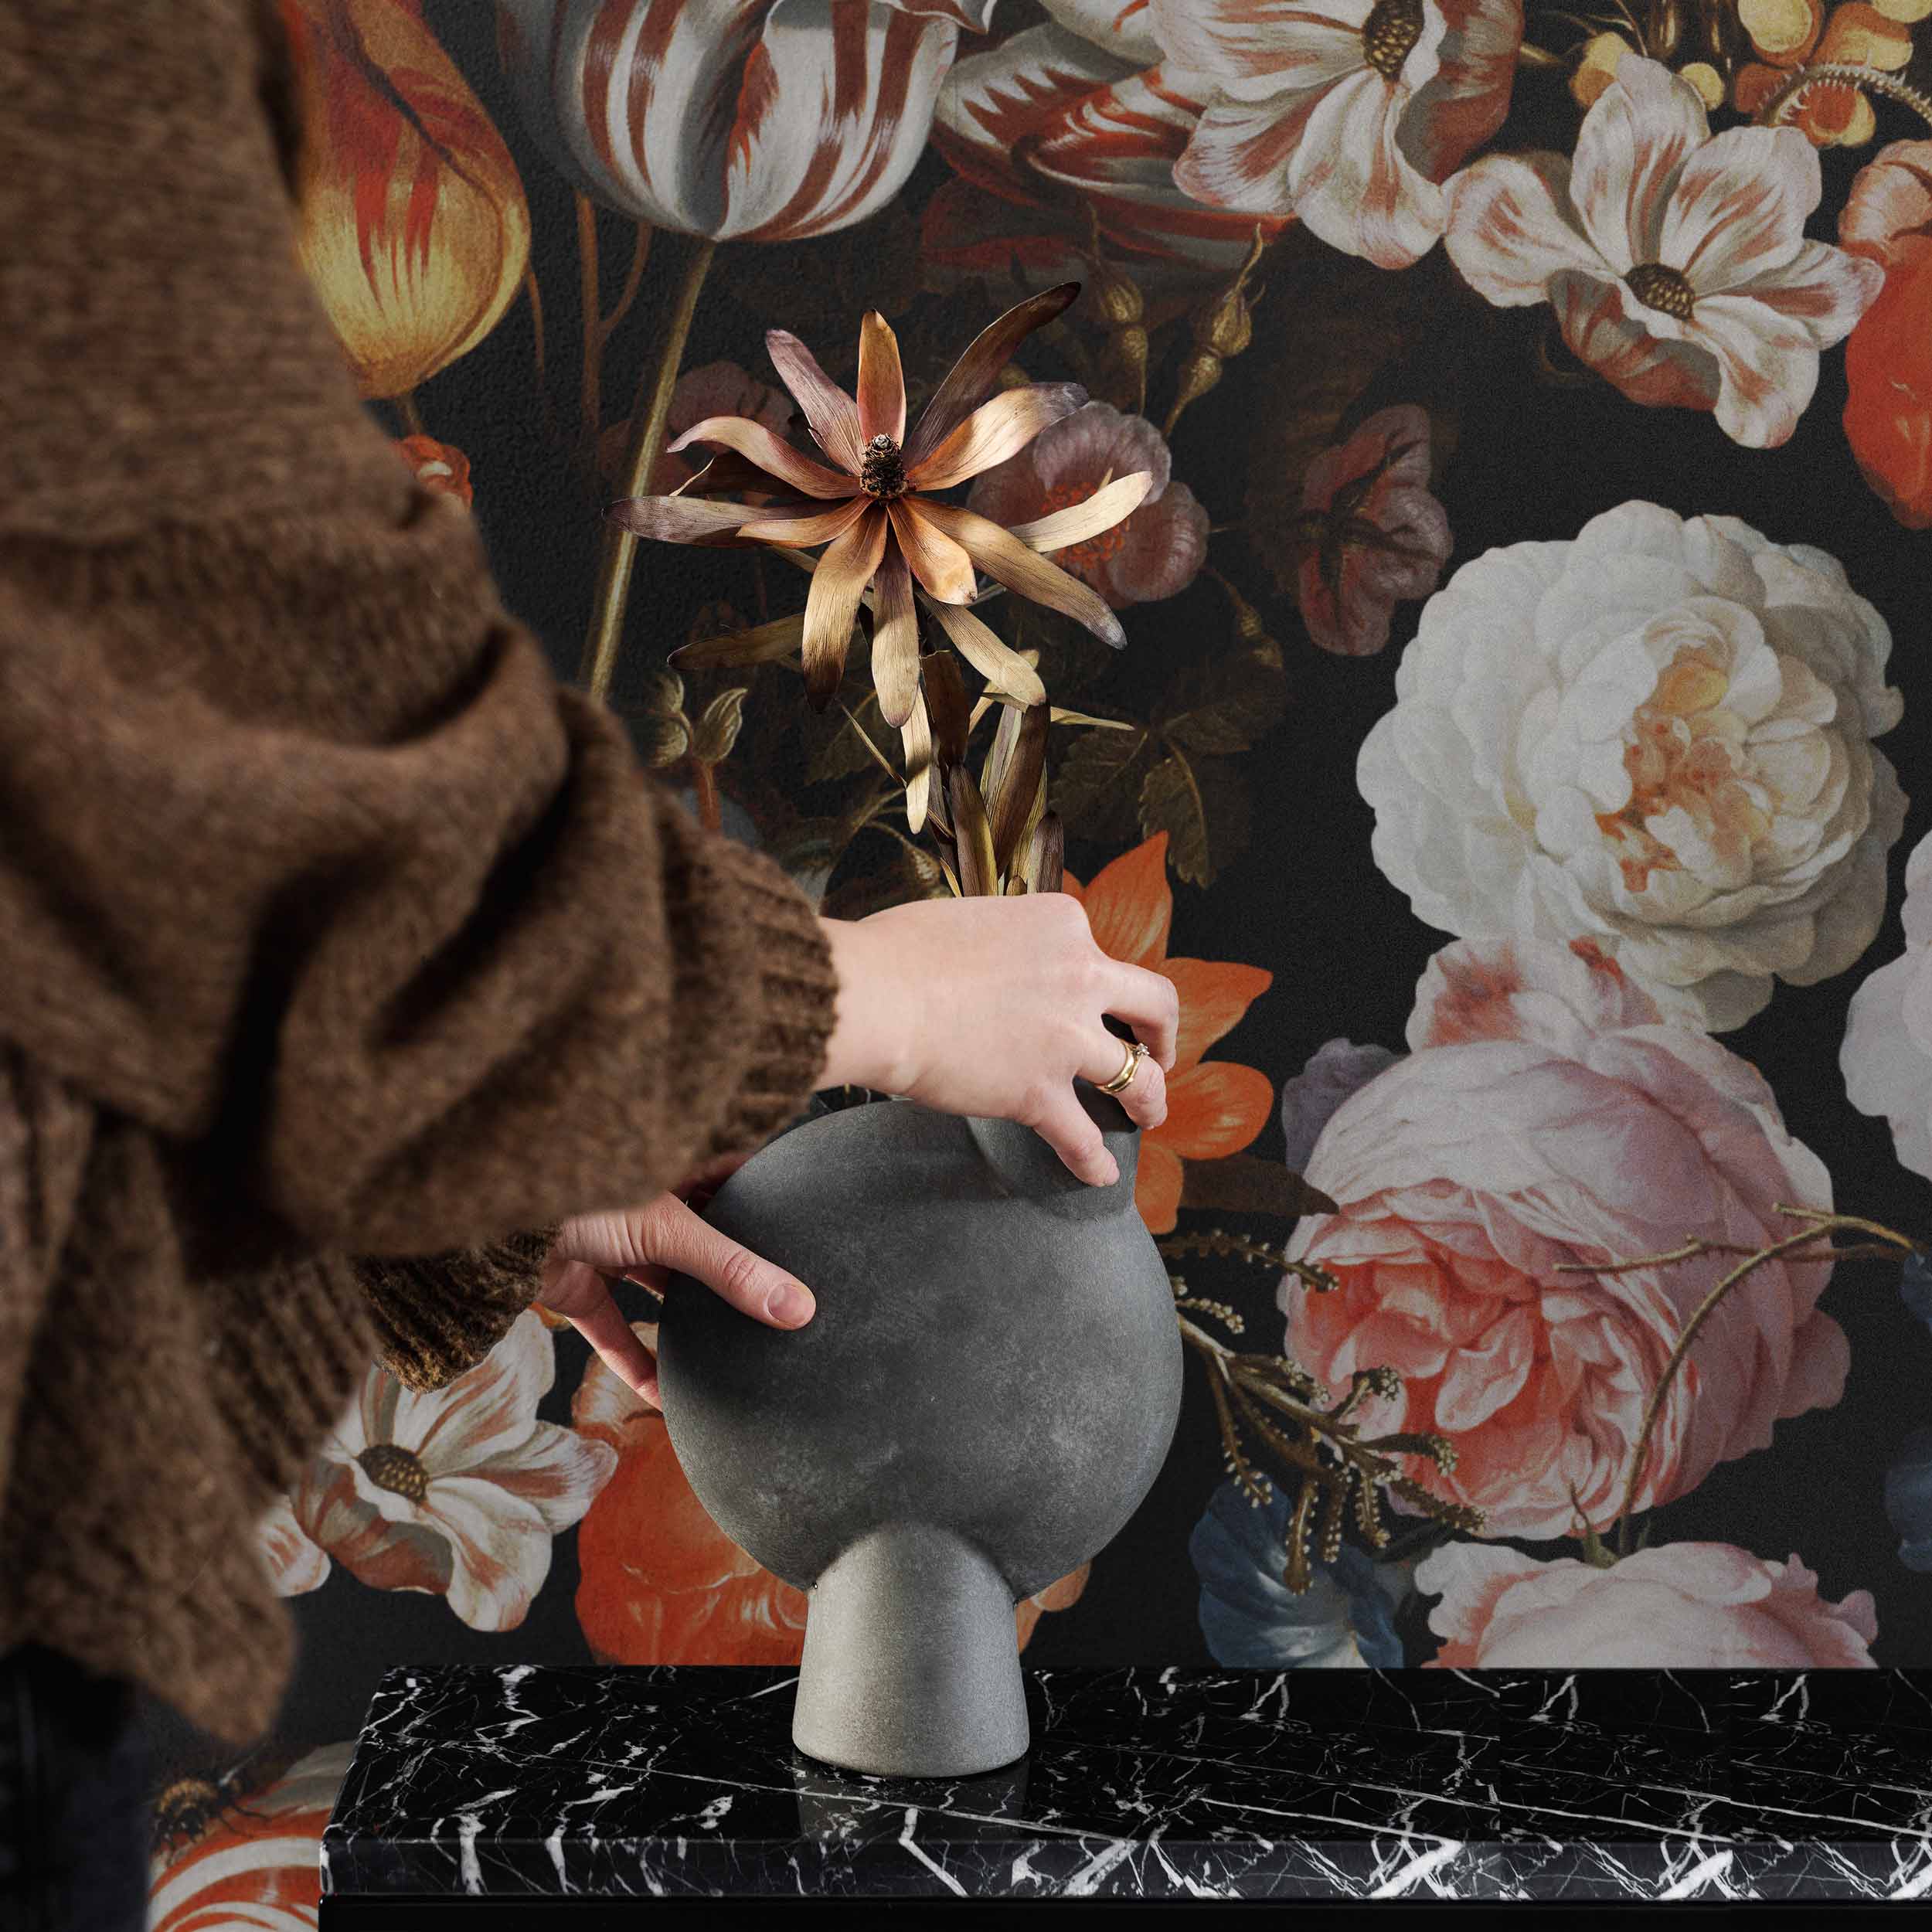 Black Floral Fabric, Wallpaper and Home Decor